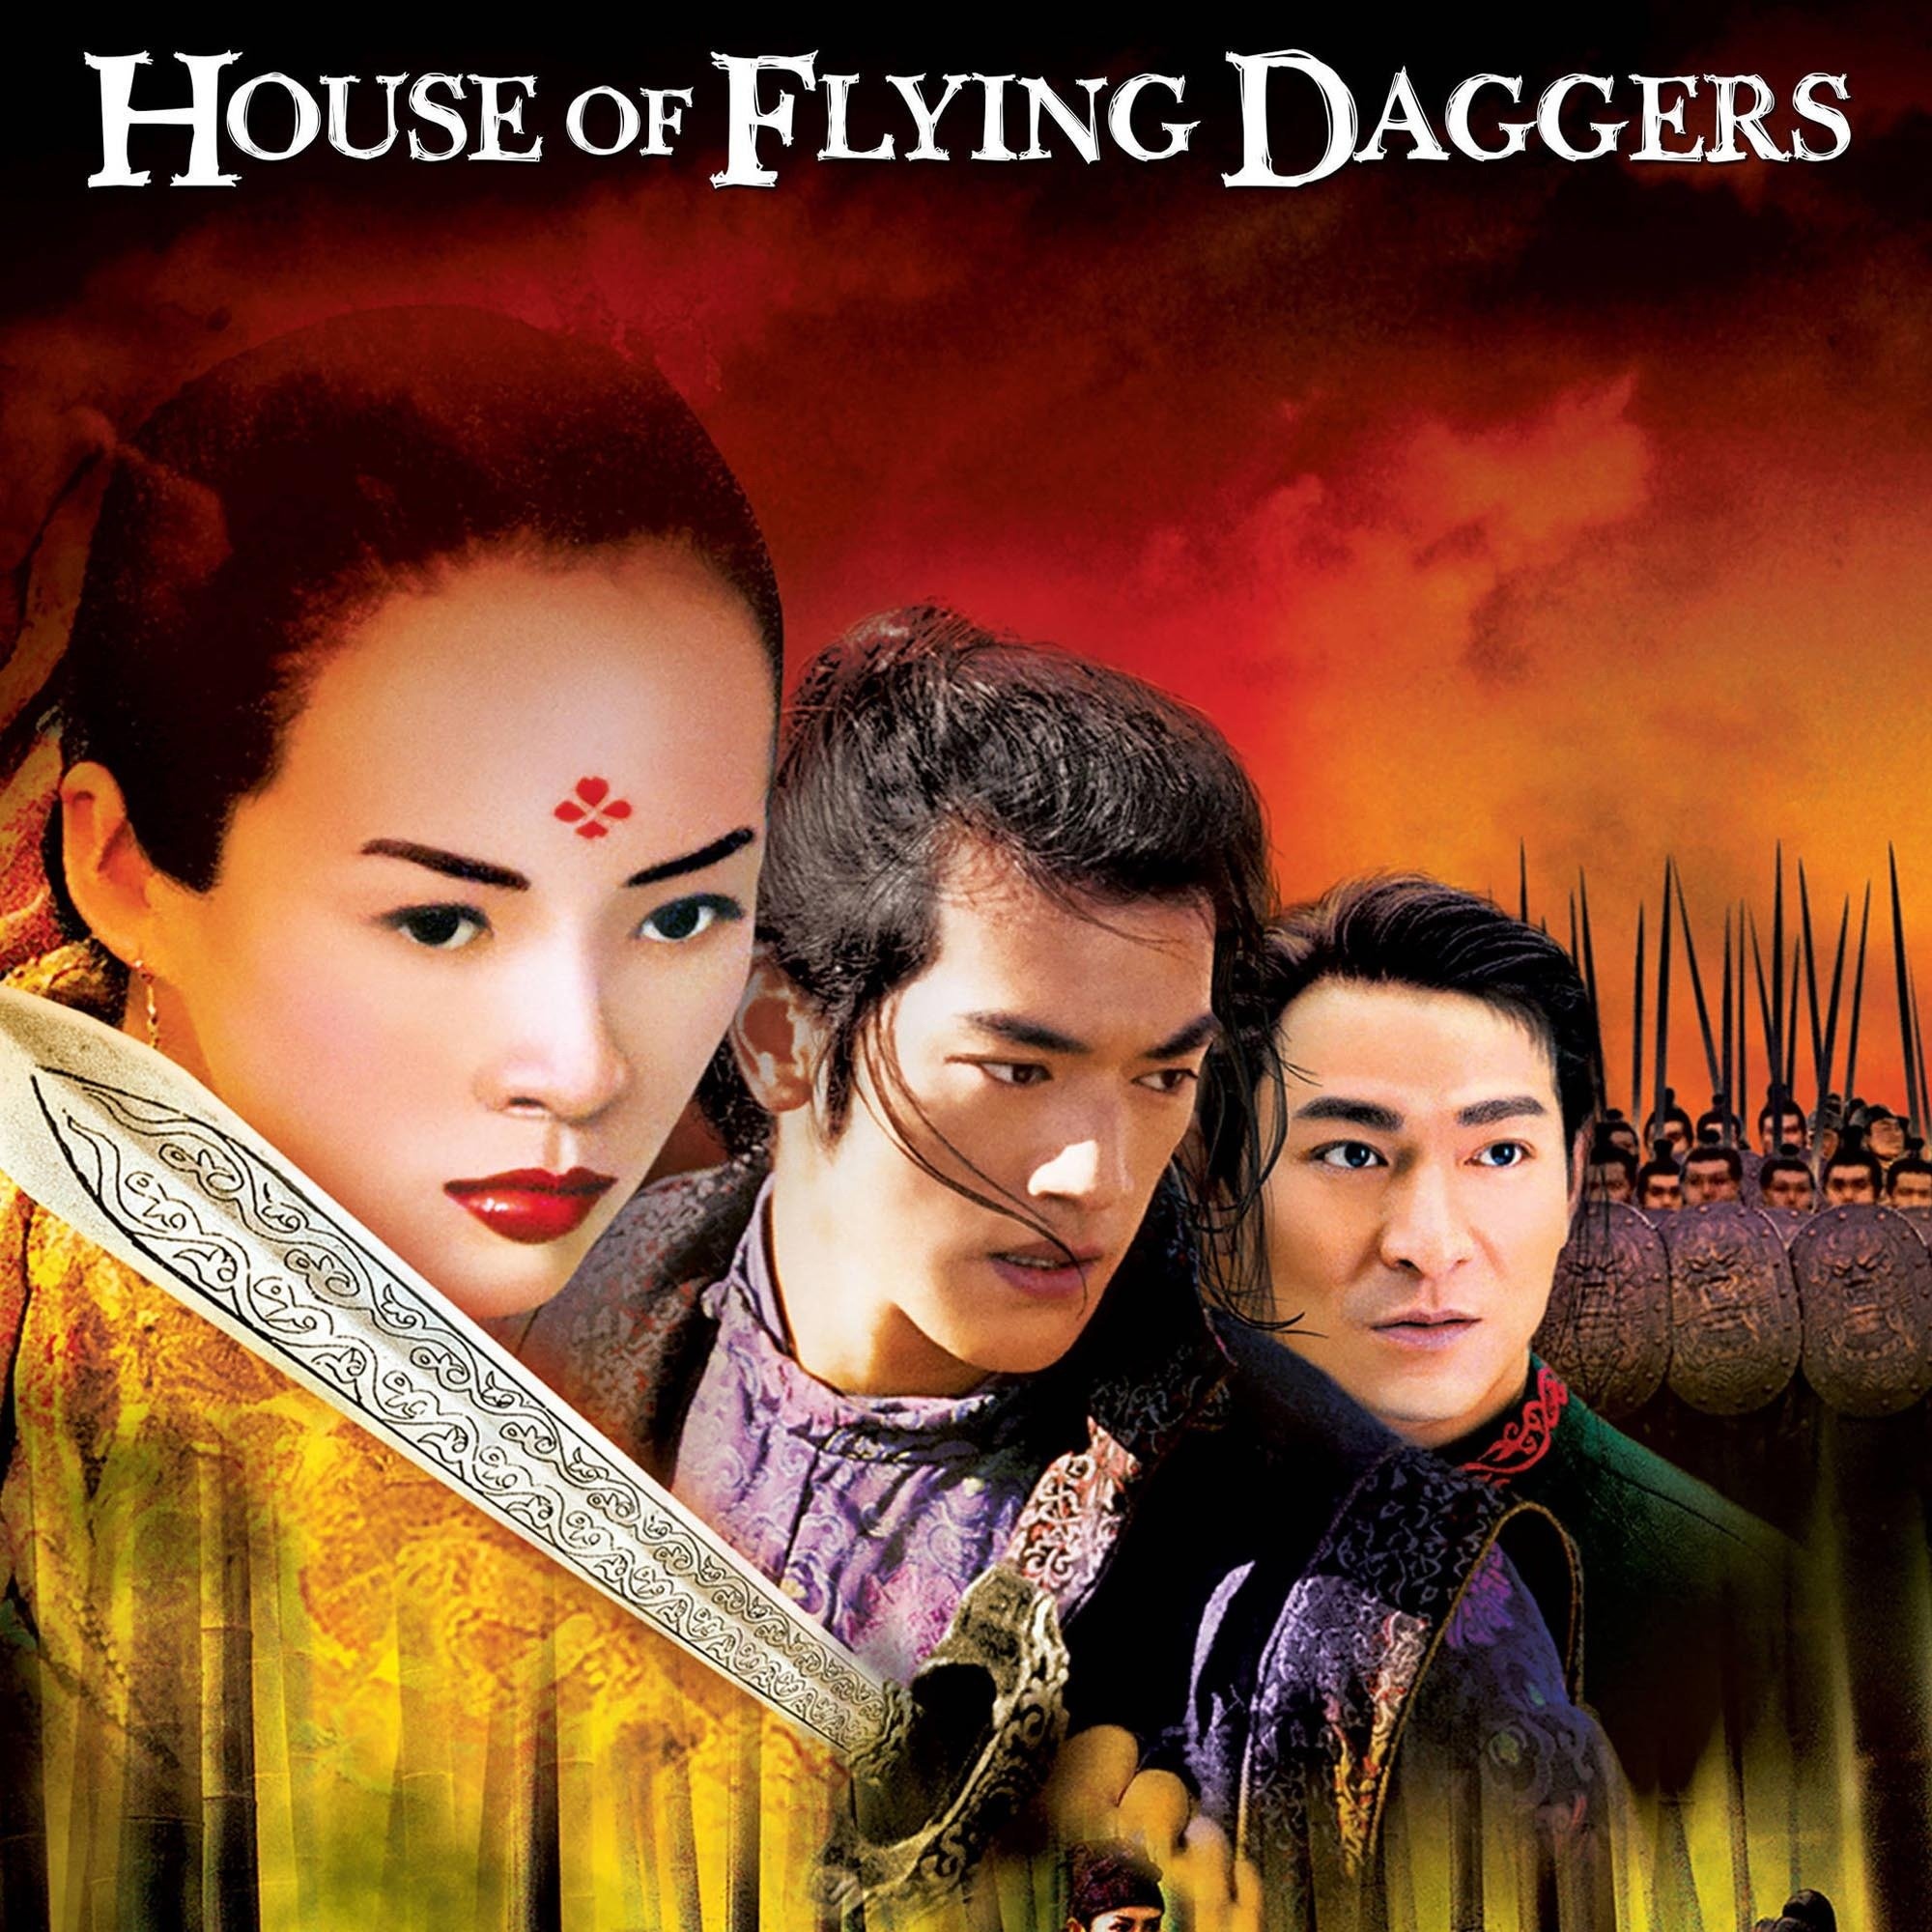 House of Flying Daggers, Free online streaming, Martial arts epic, Unforgettable story, 2000x2000 HD Phone